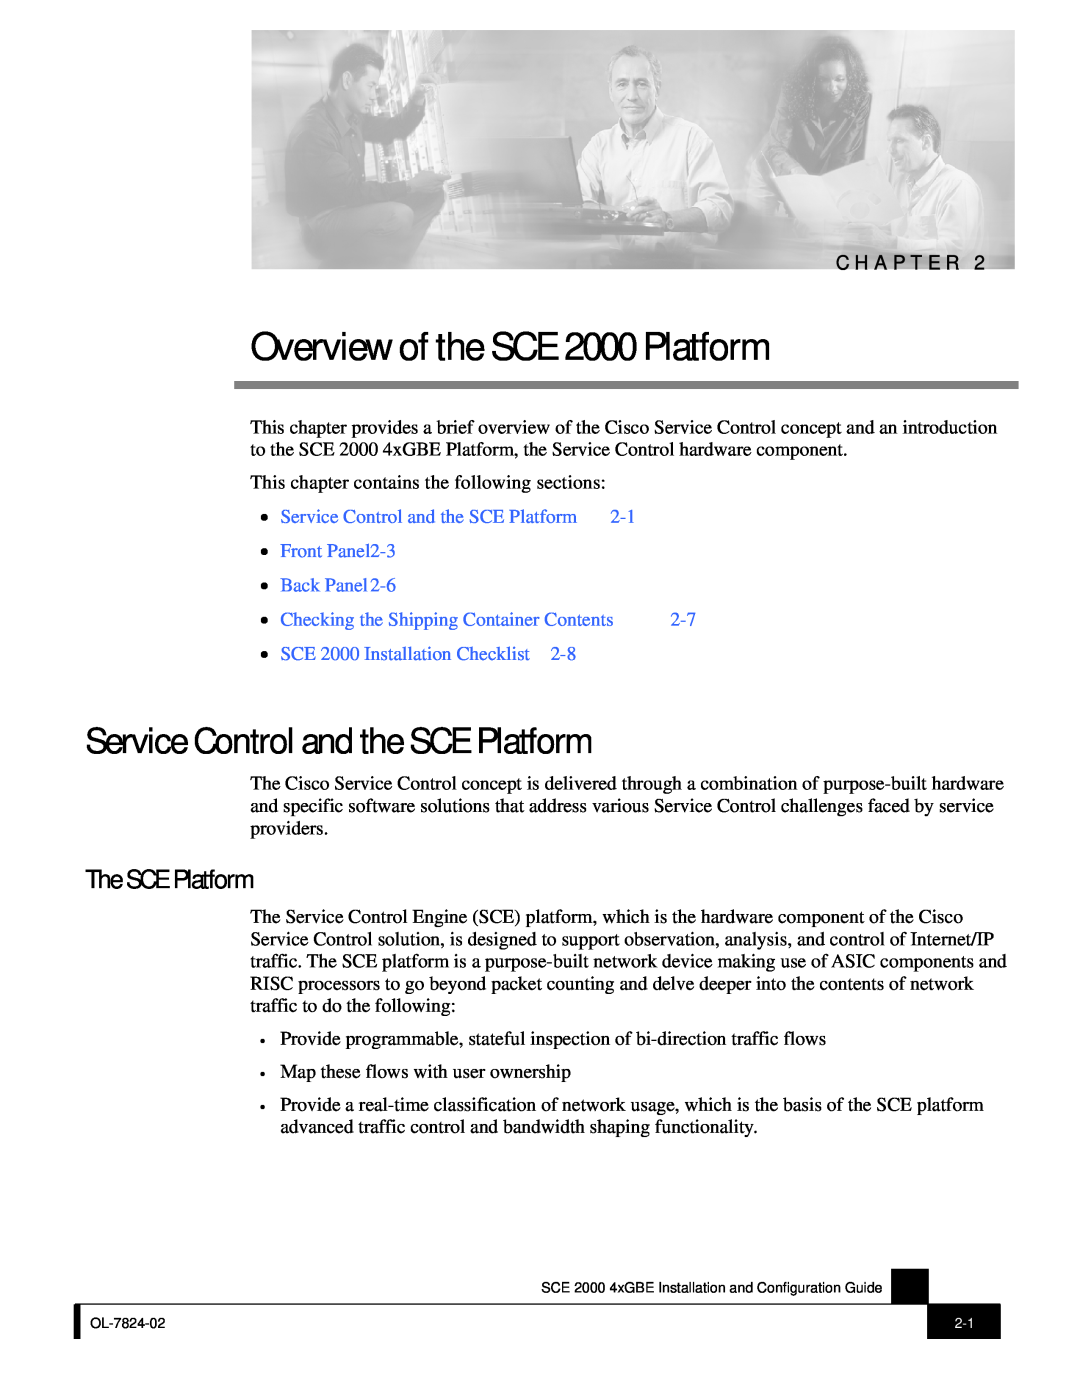 Cisco Systems SCE 2000 4xGBE Overview of the SCE 2000 Platform, Service Control and the SCE Platform, The SCE Platform 